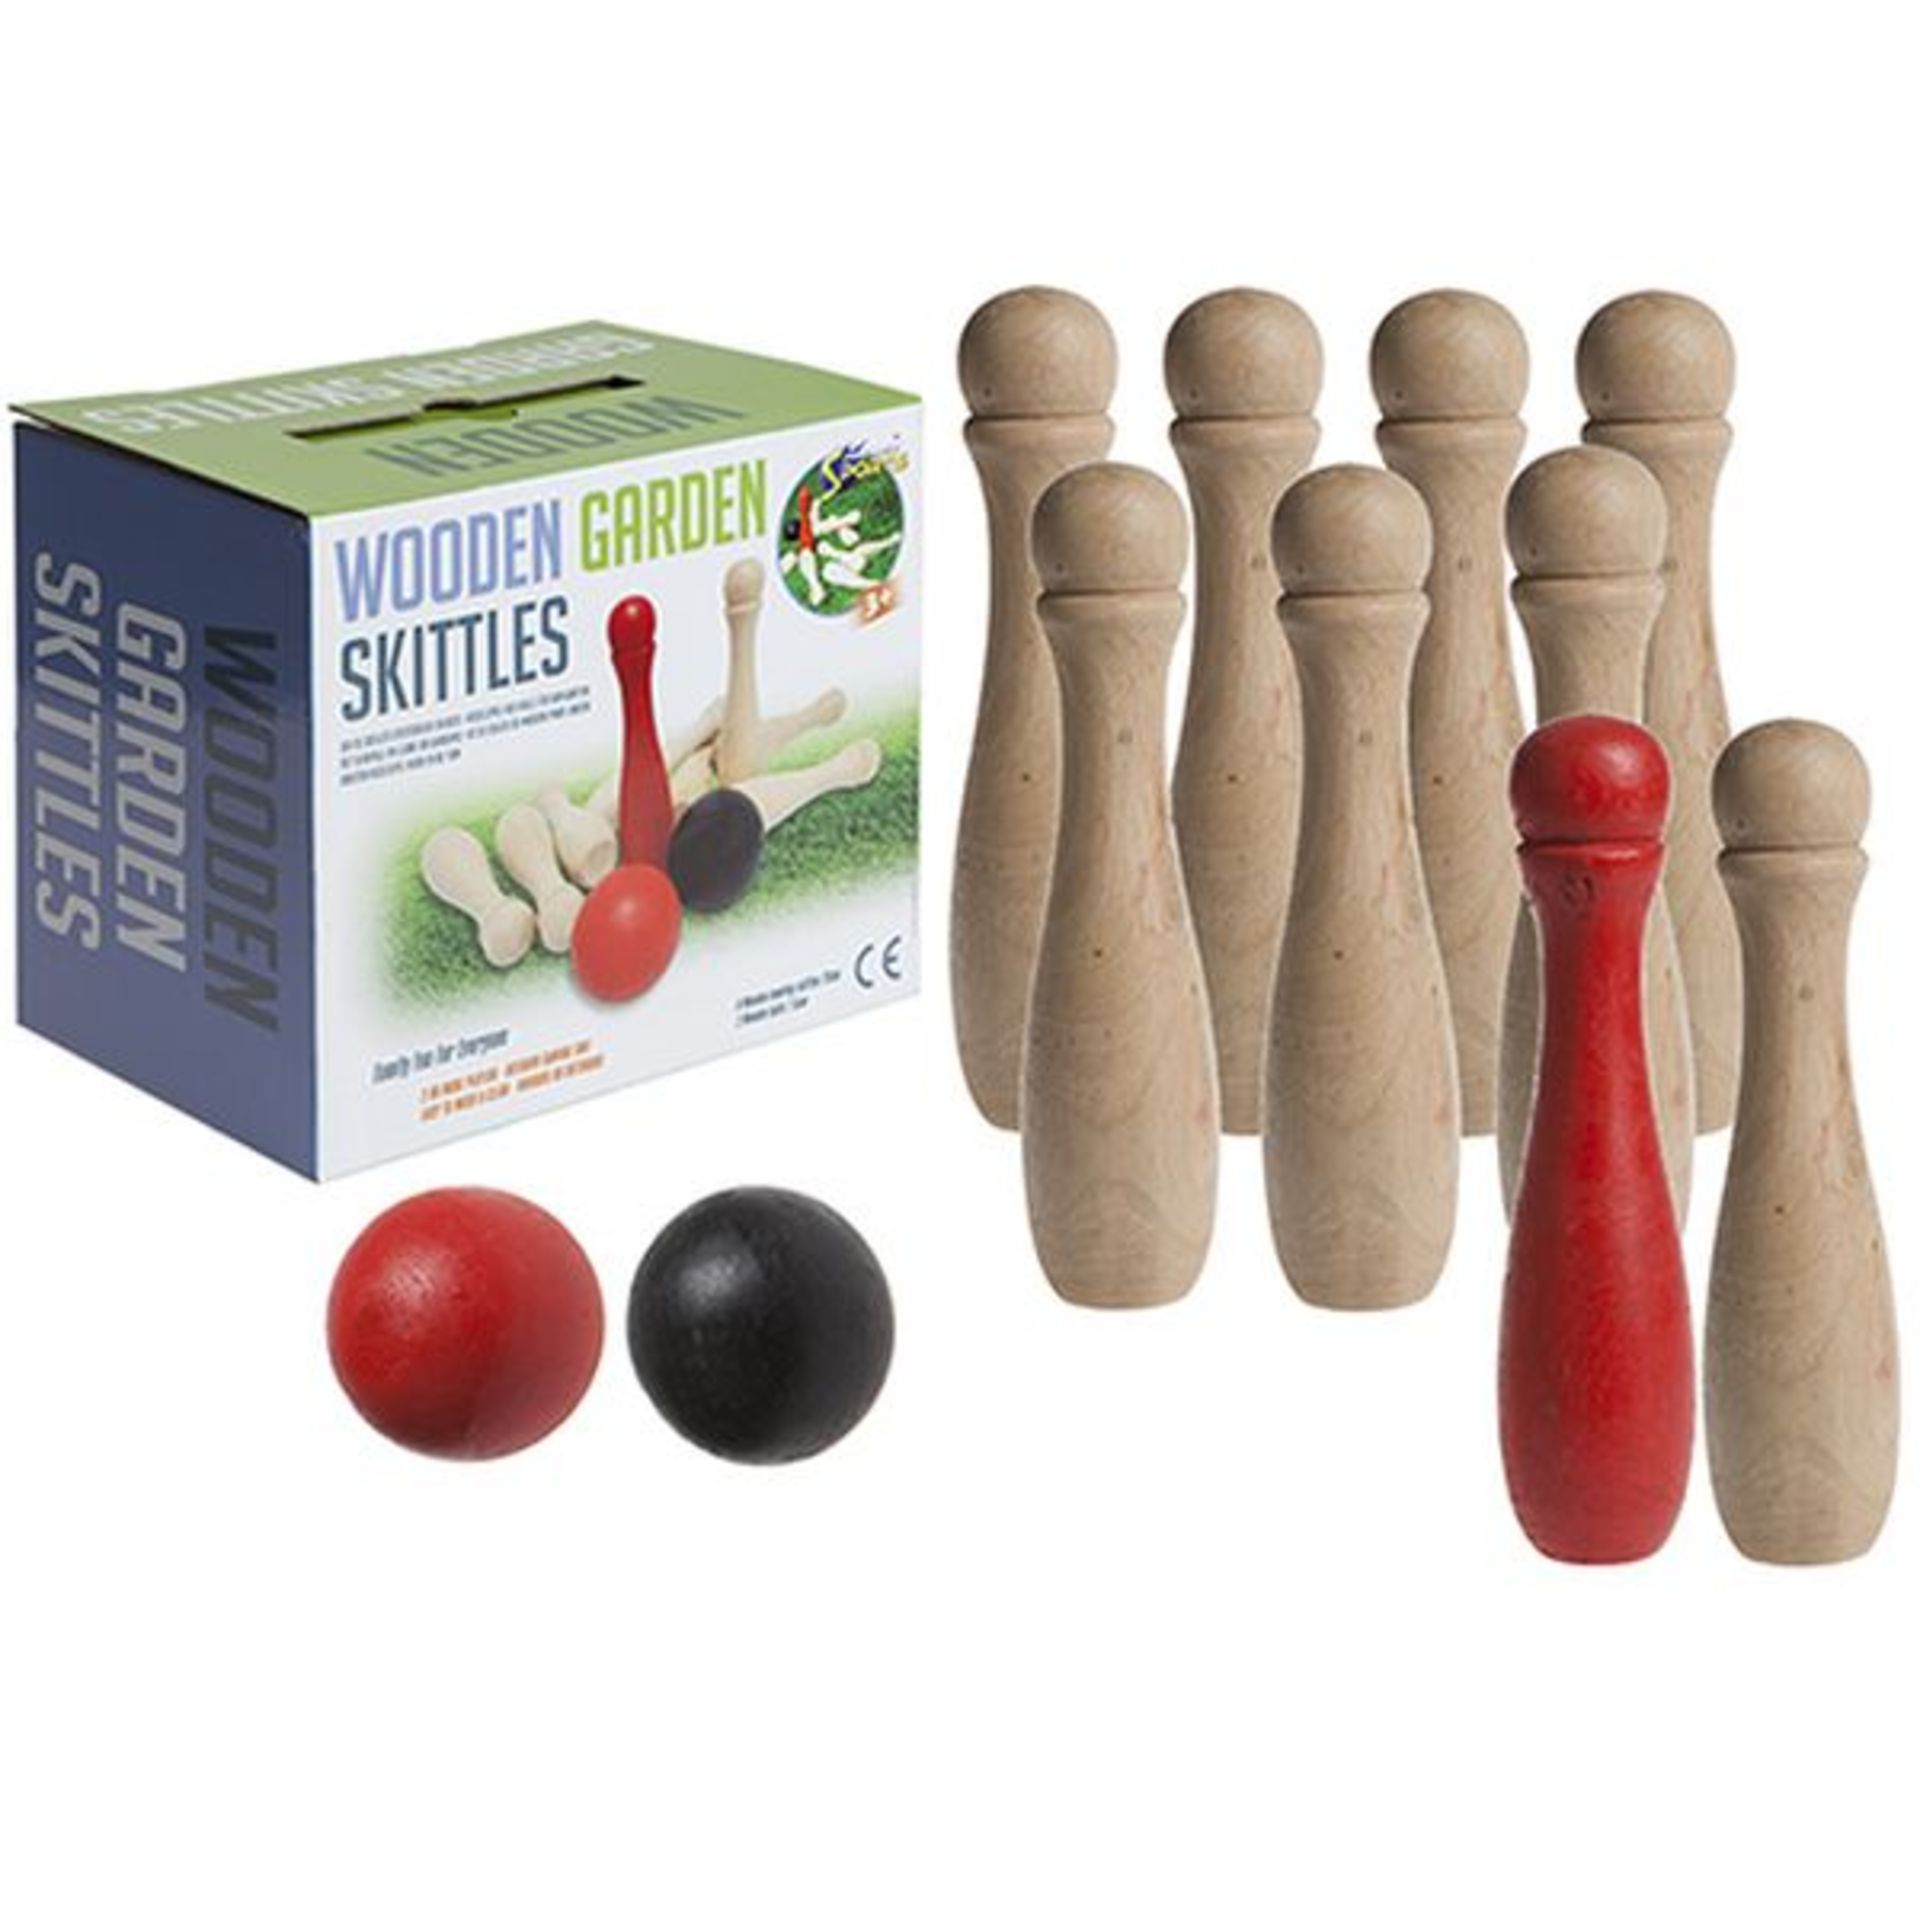 V Brand New Premier Sports Wooden Garden Skittles X 2 YOUR BID PRICE TO BE MULTIPLIED BY TWO